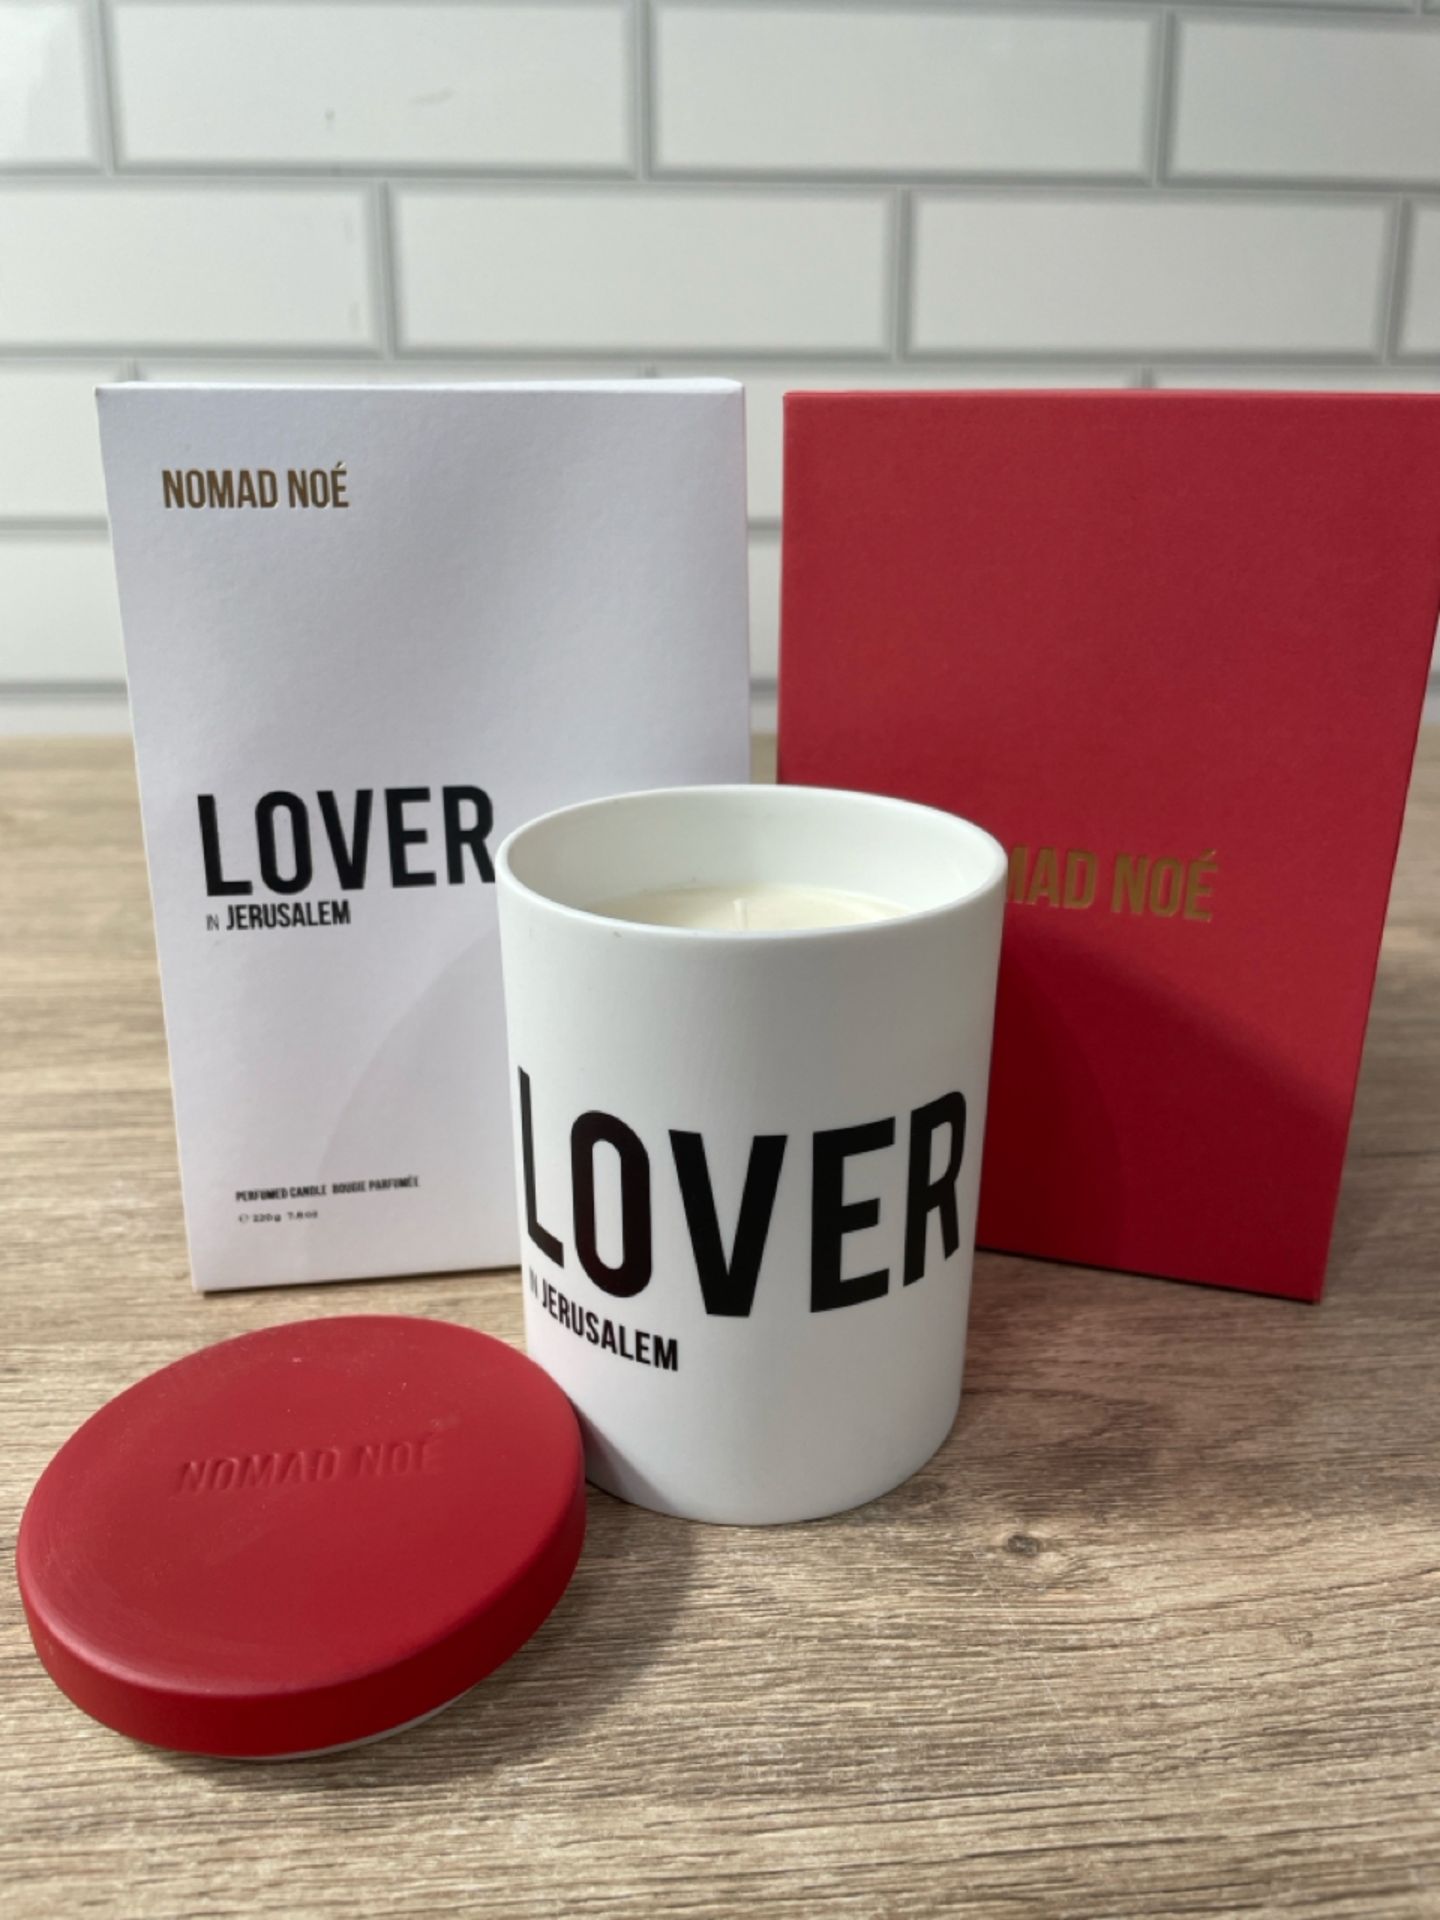 Lover Scented Candle from Nomad Noe - Image 3 of 4